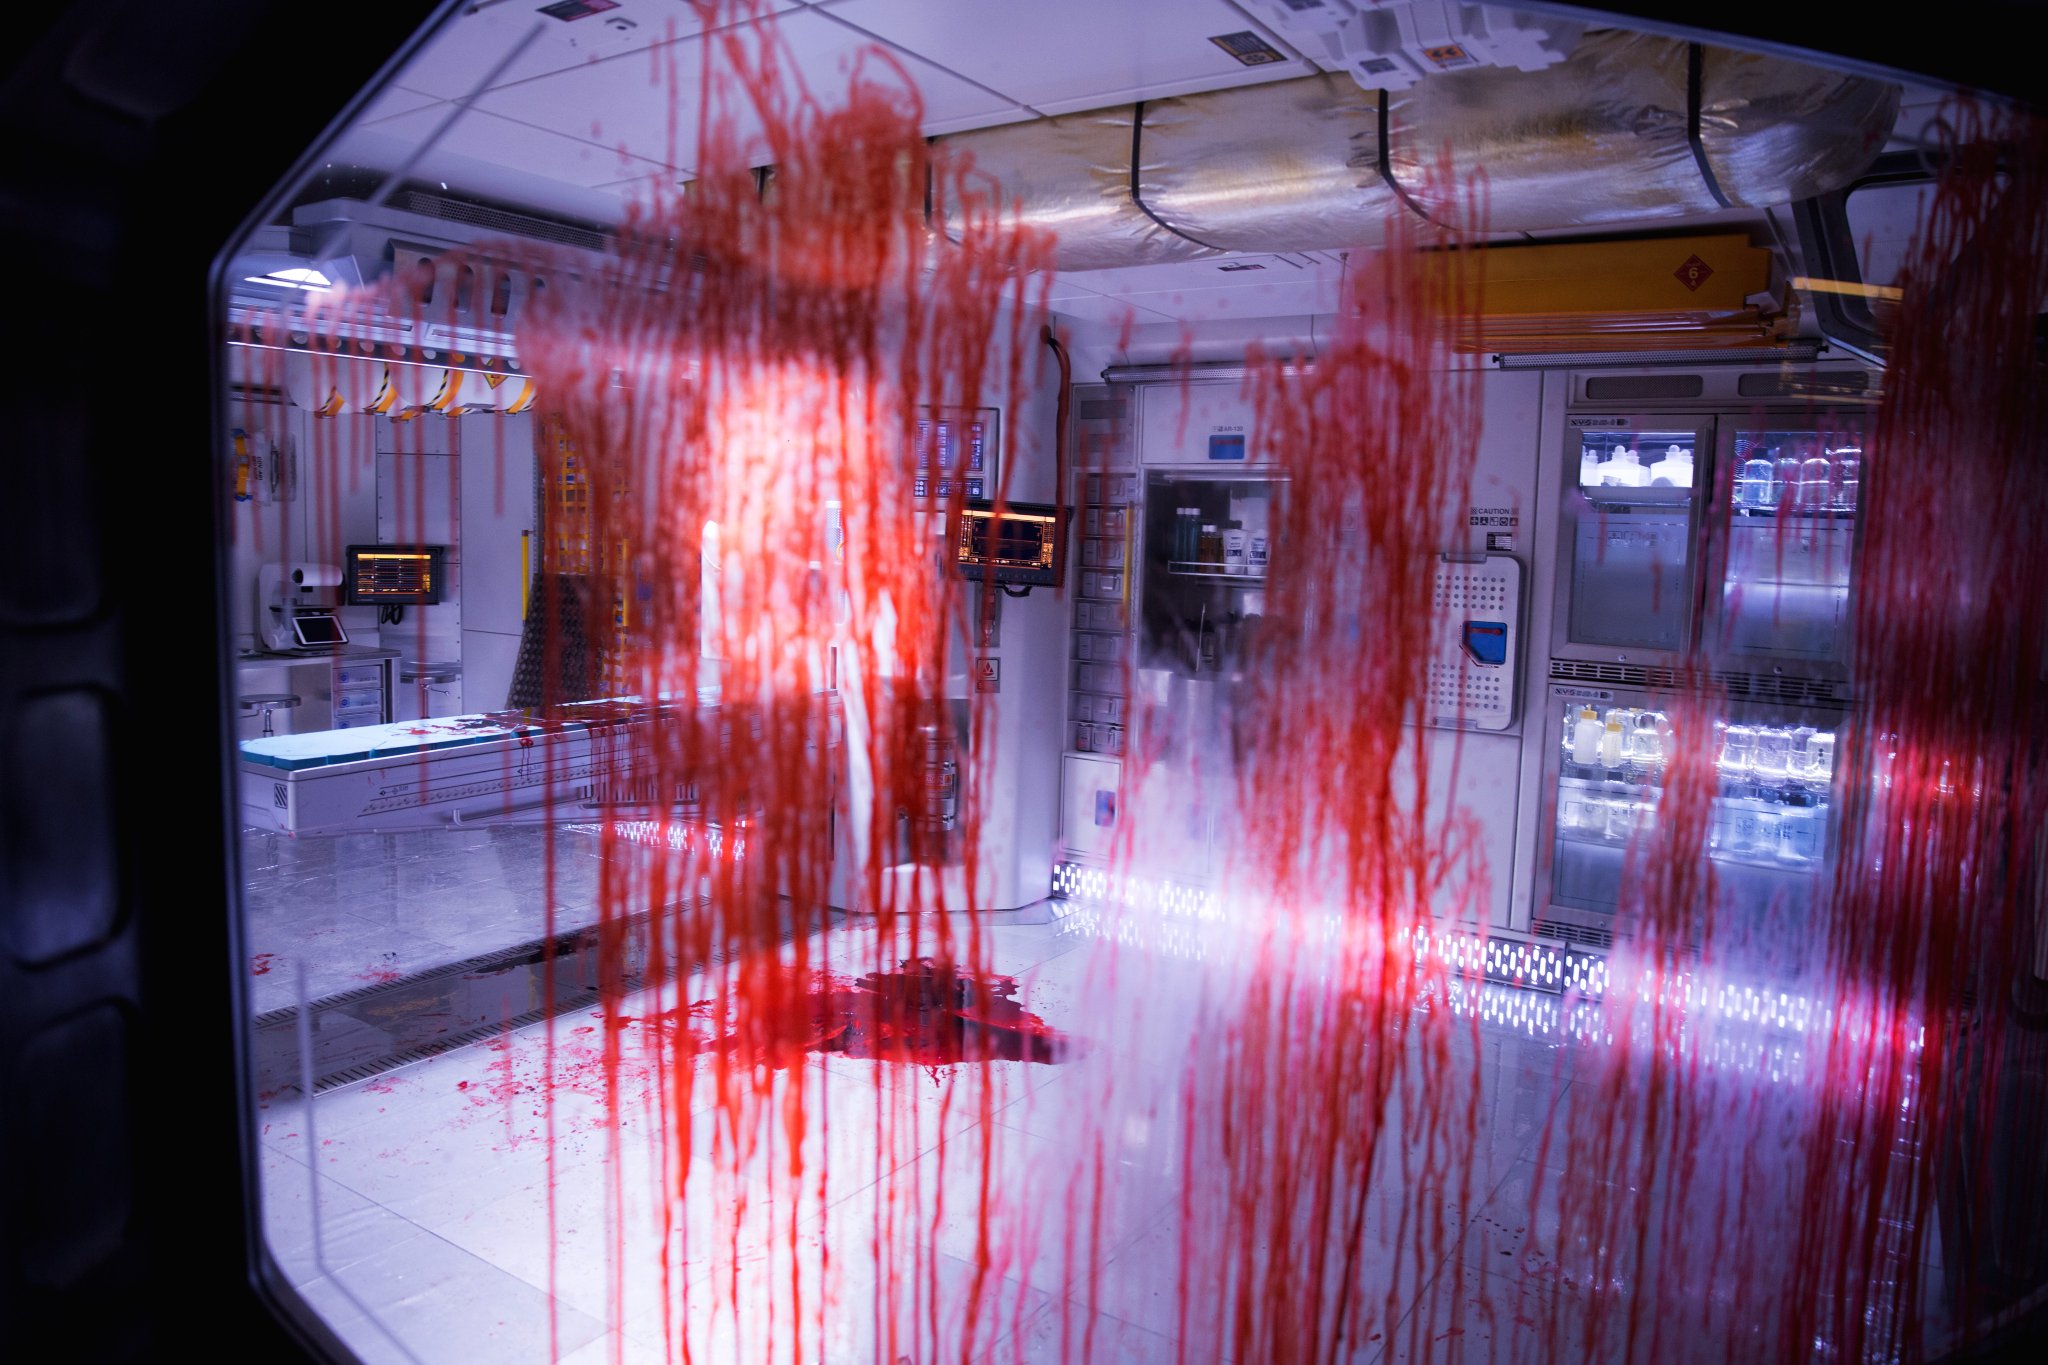 bloody_aftermath_of_alien_attack_617851.jpg